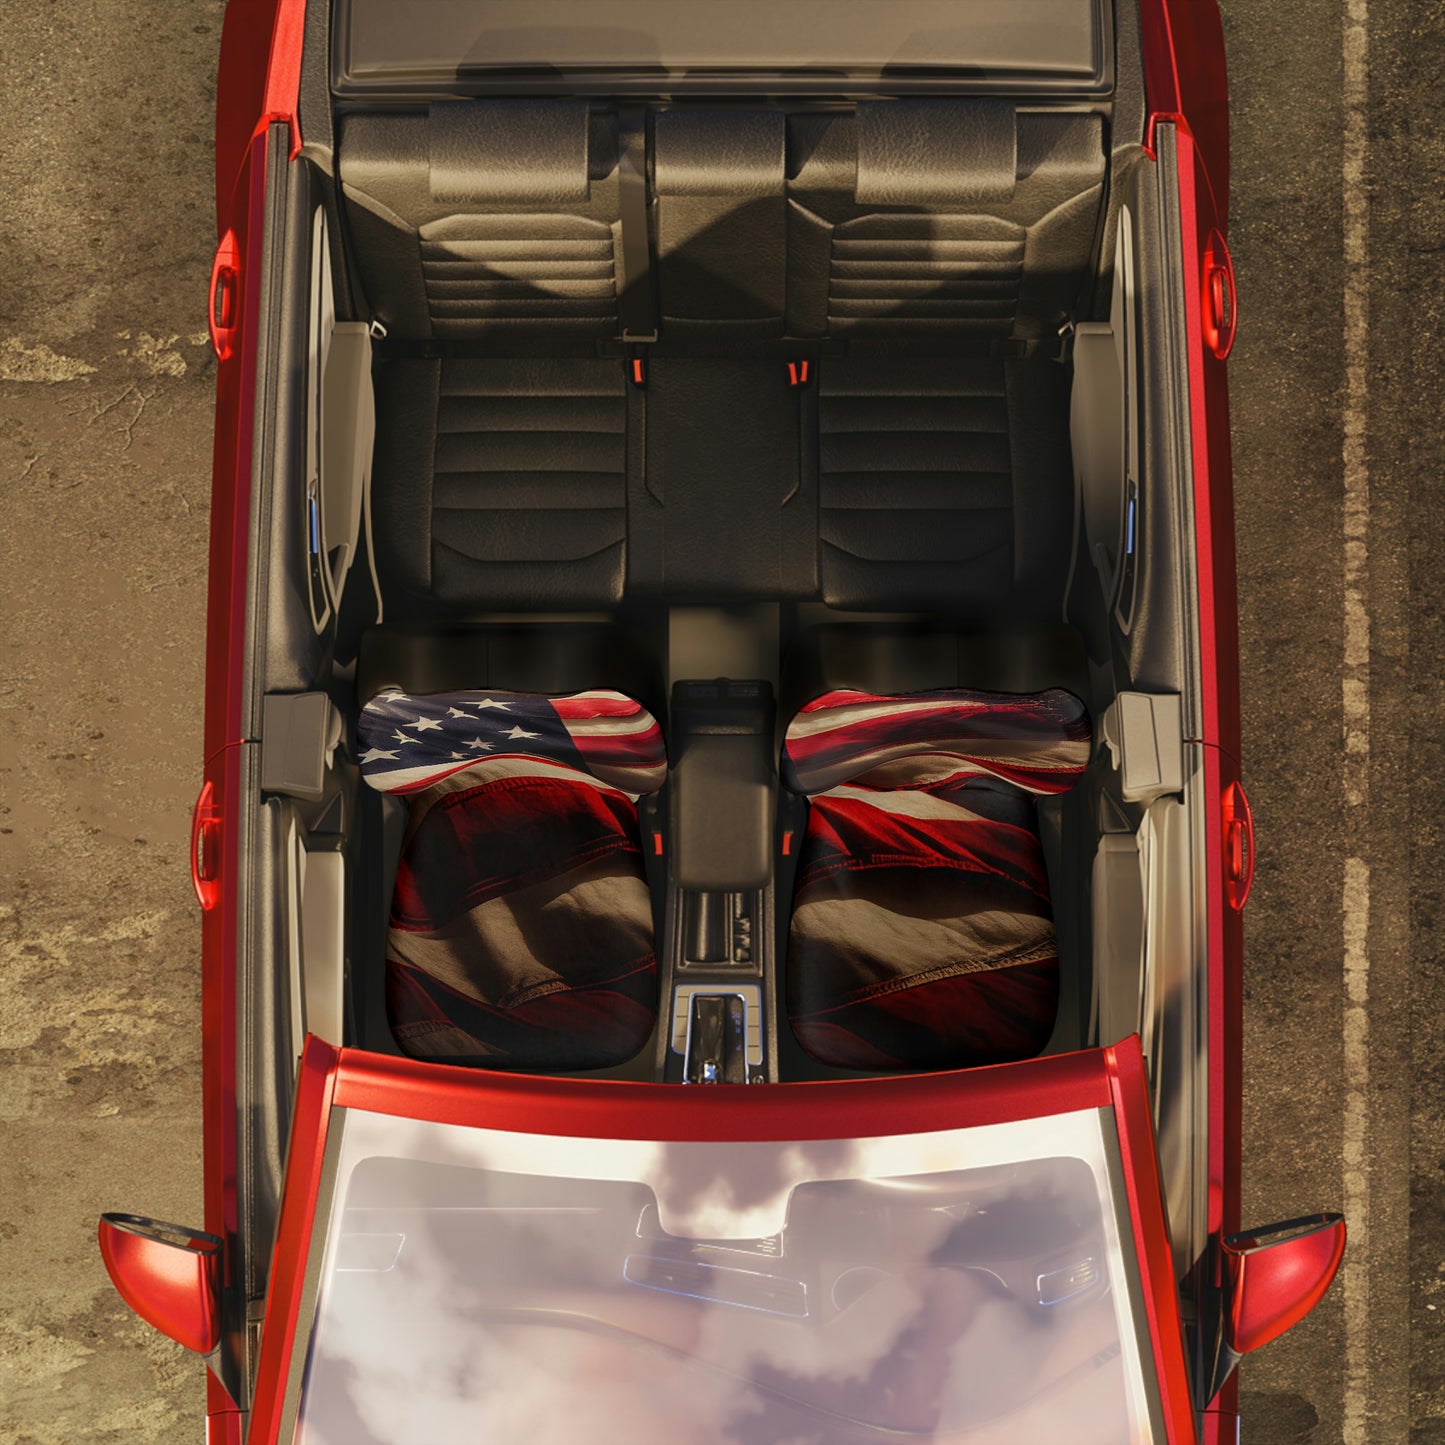 'Patriot' Polyester Car Seat Covers